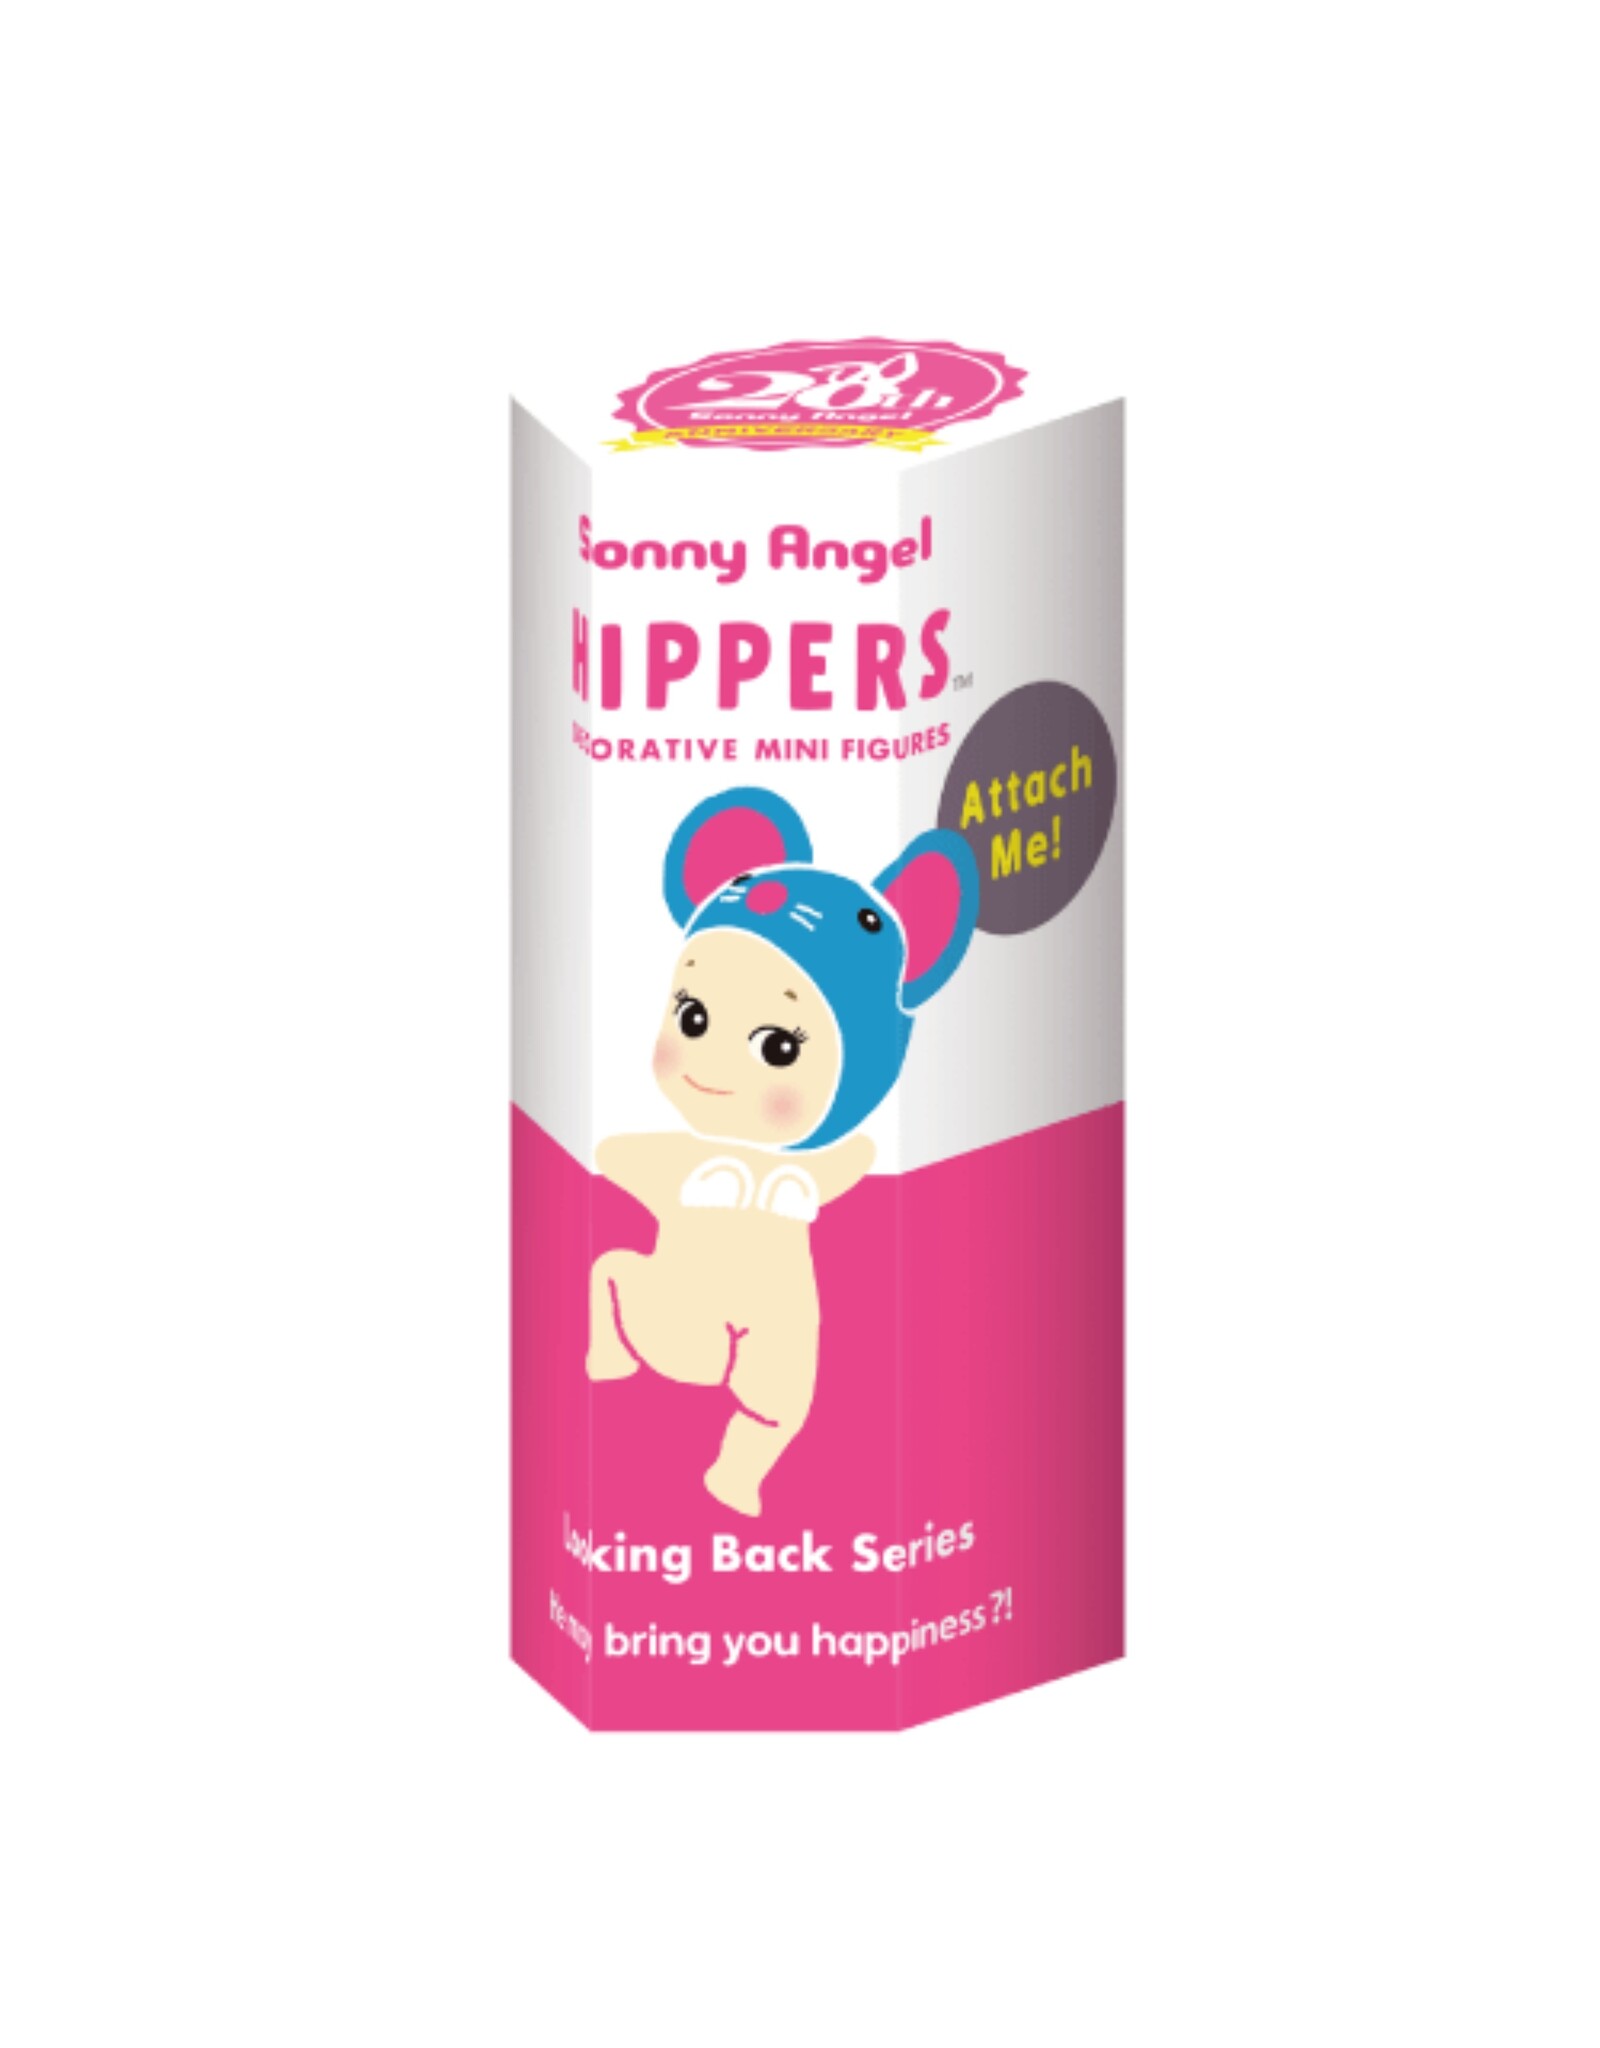 Sonny Angel COMING SOON - Hippers Looking Back - Blind Box